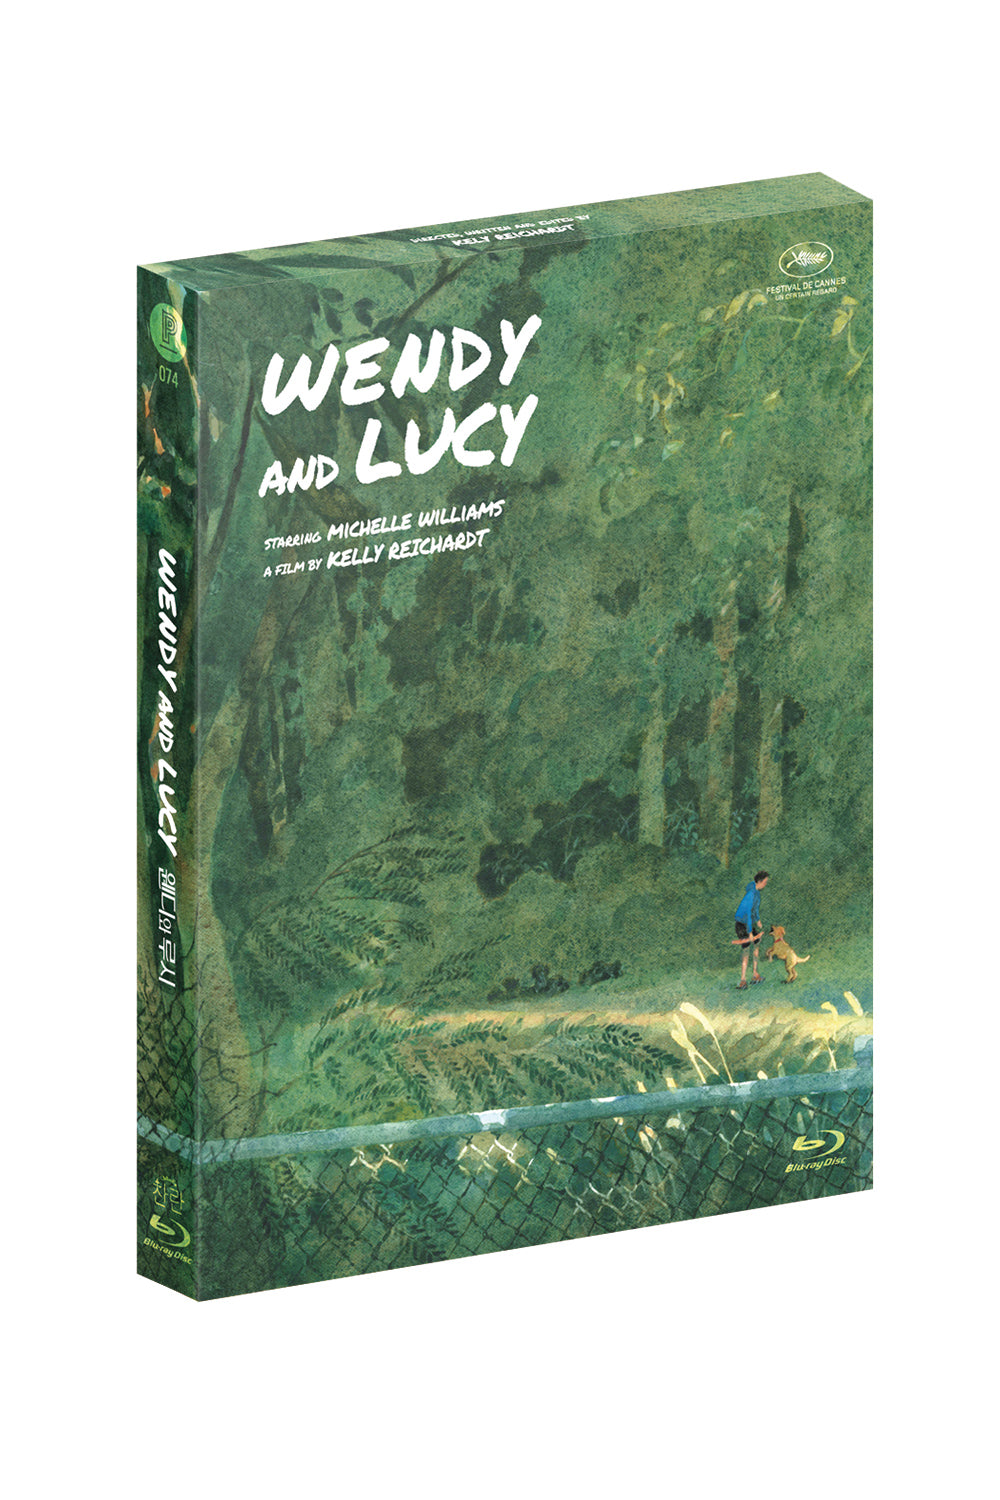 Wendy and Lucy: Limited Edition Blu-ray